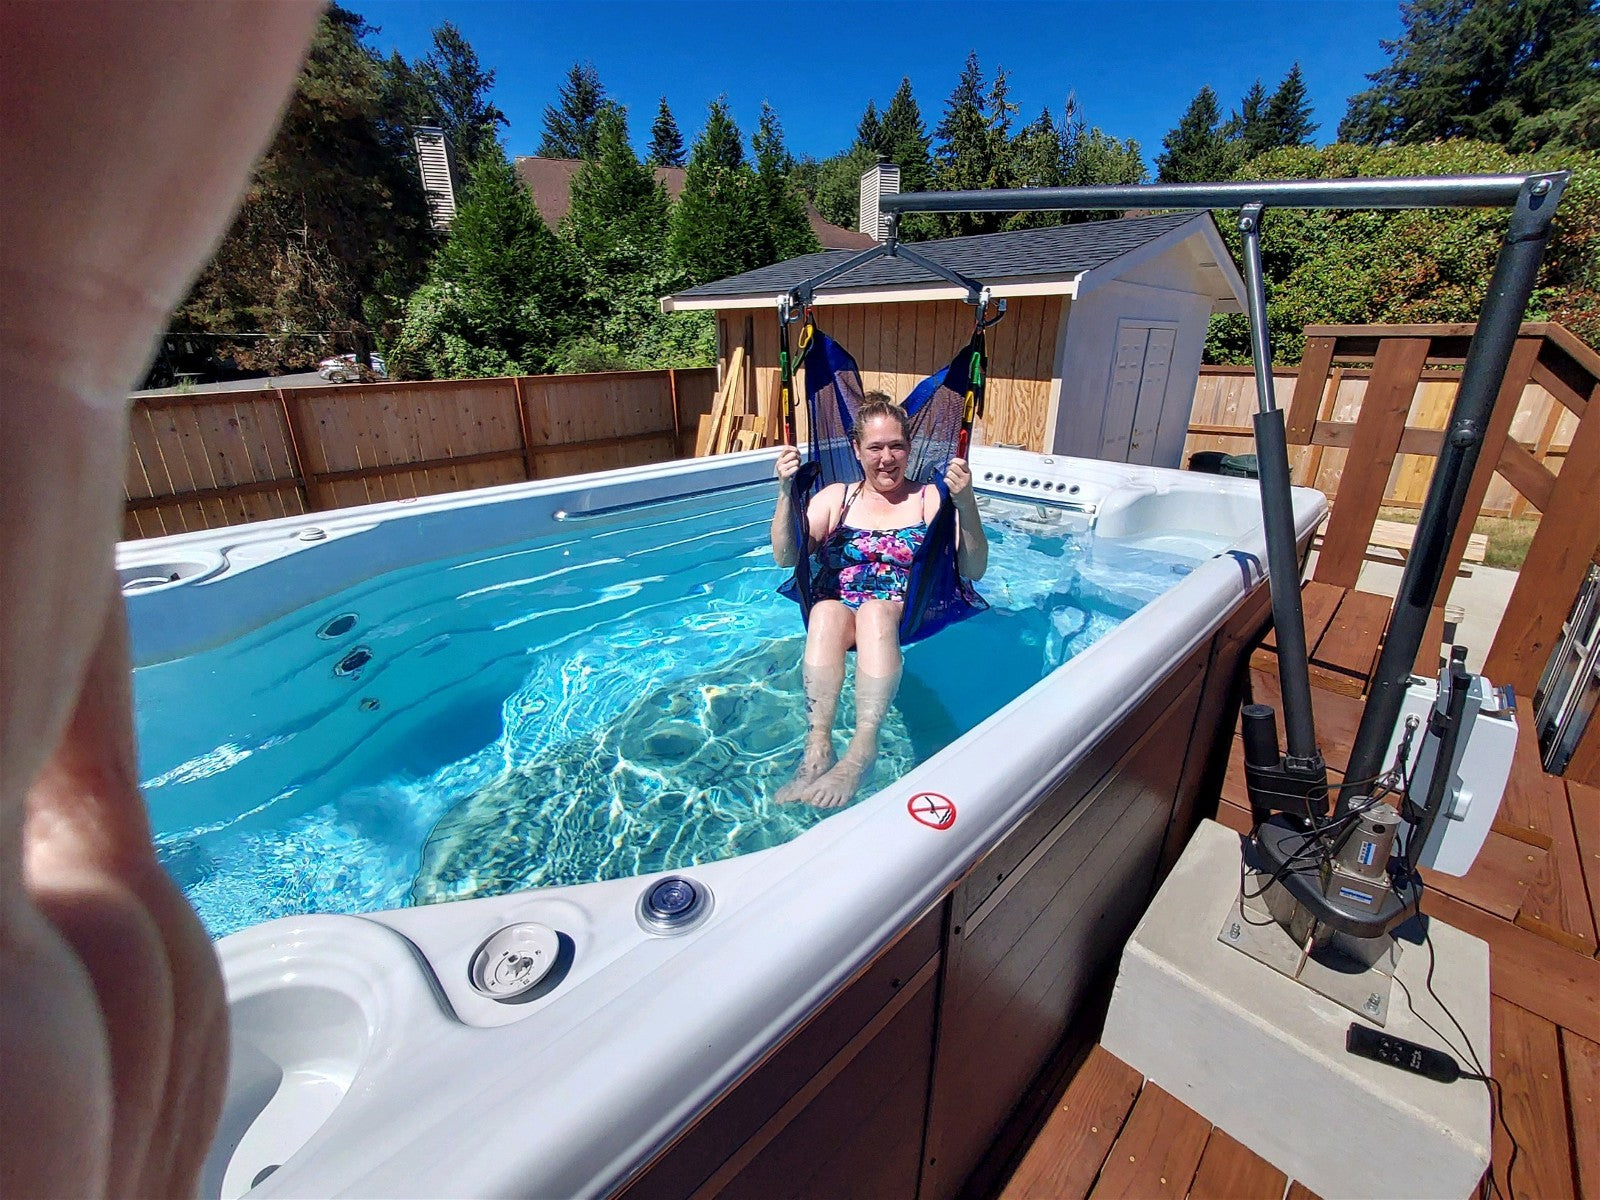 Gain Effortless Pool Access with Triton Pool Lift